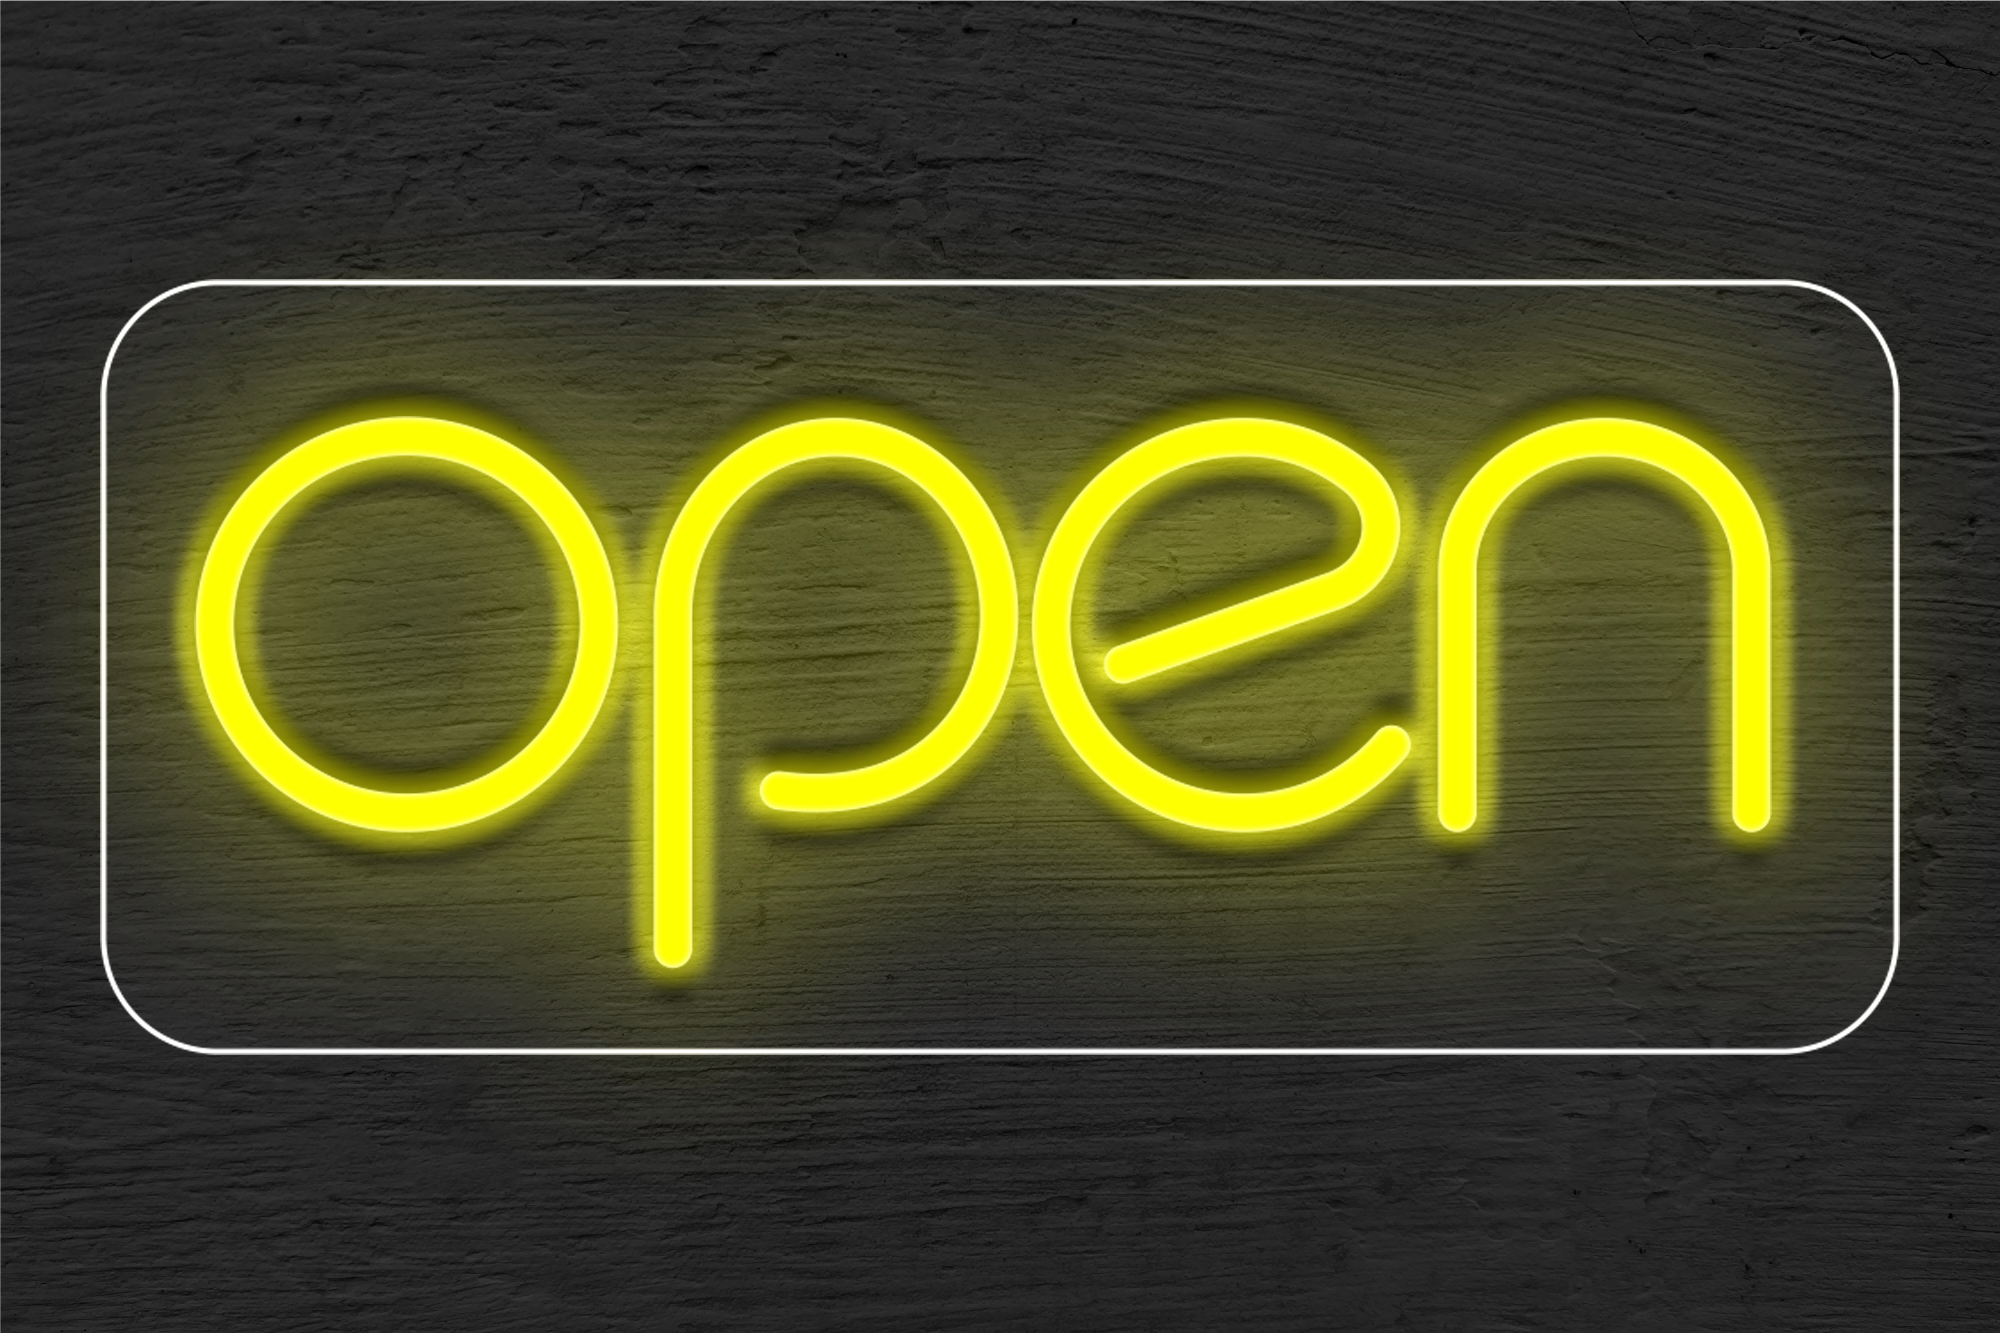 "OPEN" in All Lower Case LED Neon Sign